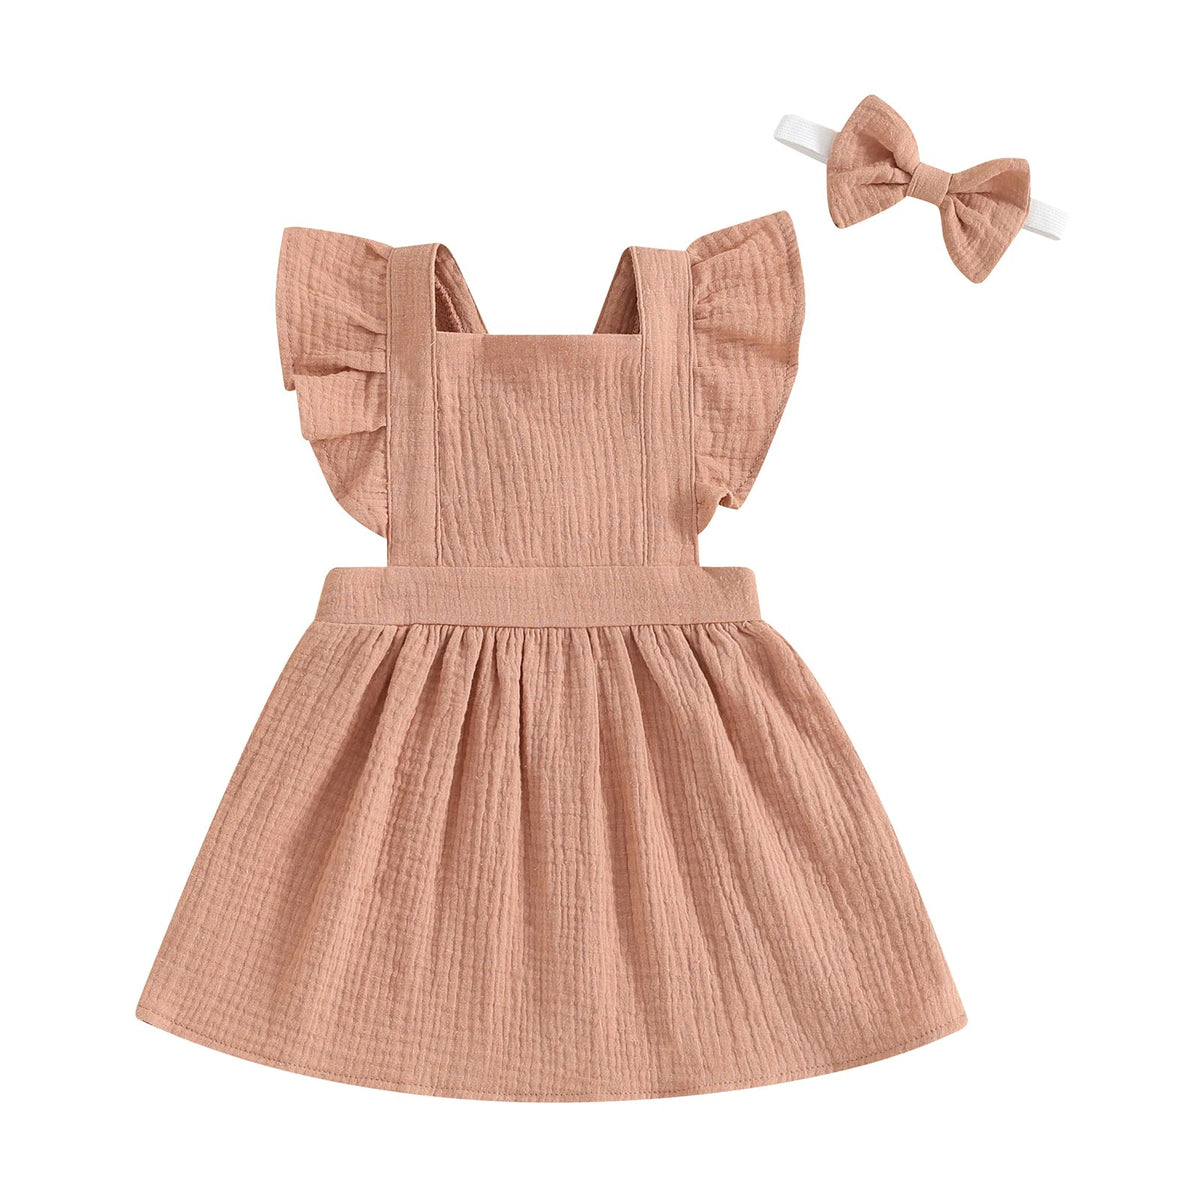 Fly Sleeve Square Neck Dress with Headband - The Ollie Bee